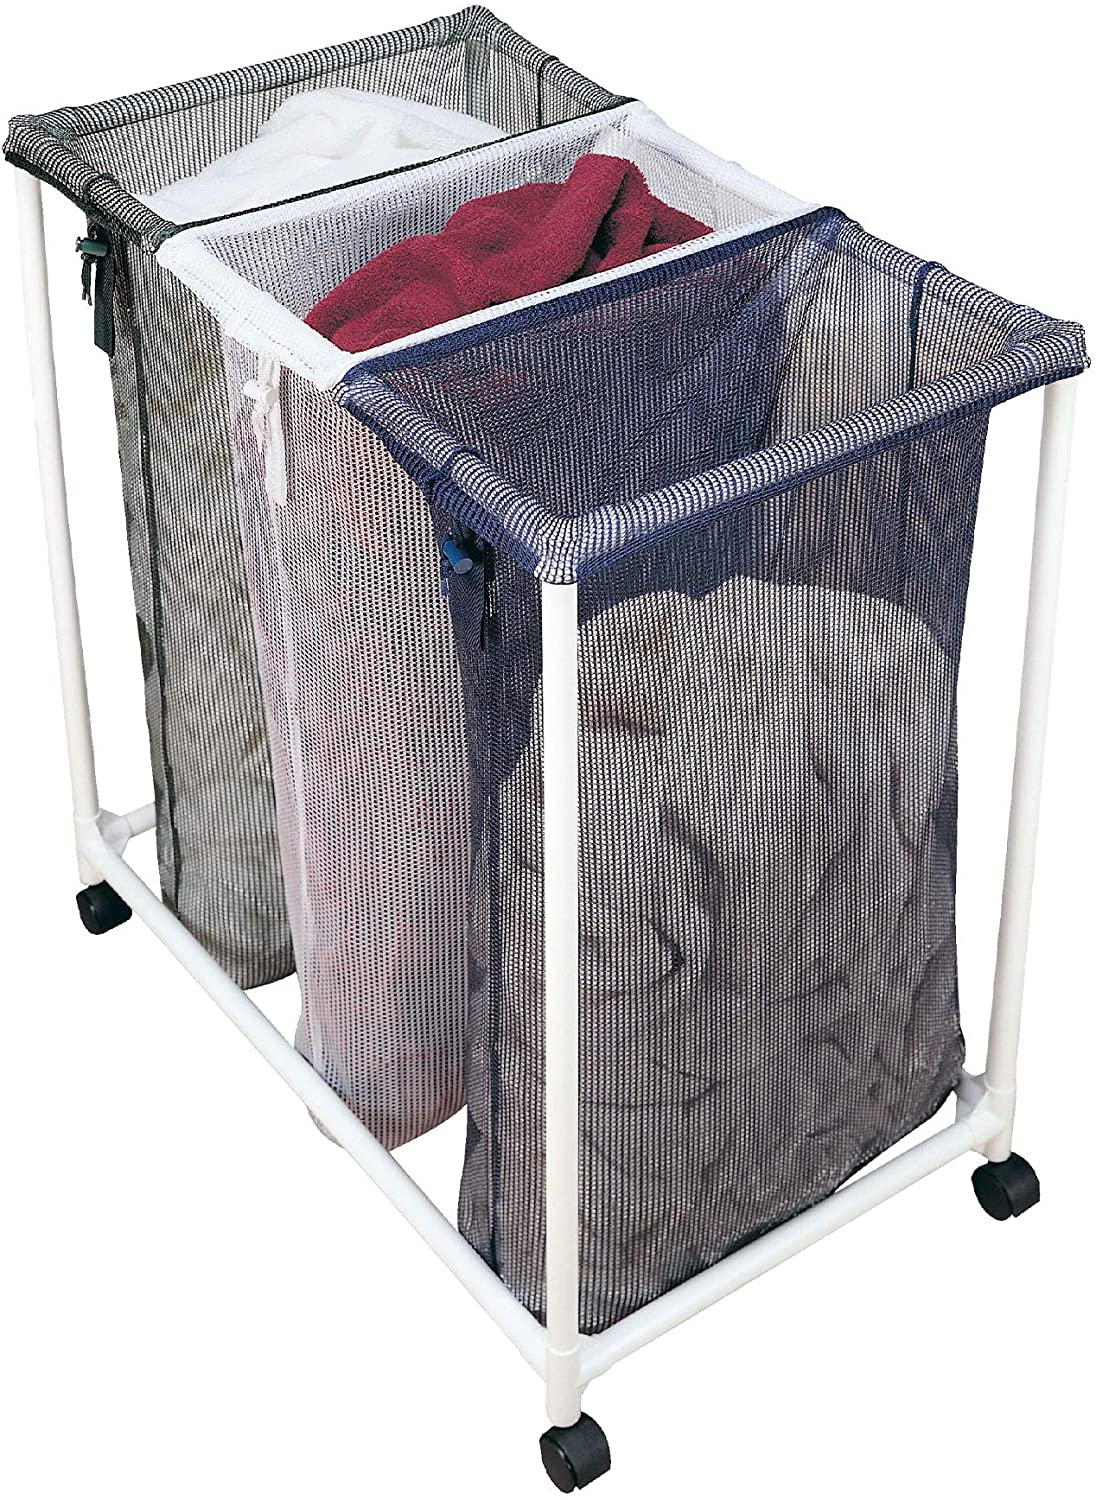 Copy of Deluxe Rolling Triple-Compartment Laundry Sorter Hampers with Wheels - Holds 9 Loads - VentilAir Mesh Fabric White, Blue, Green - Smart Design® 1